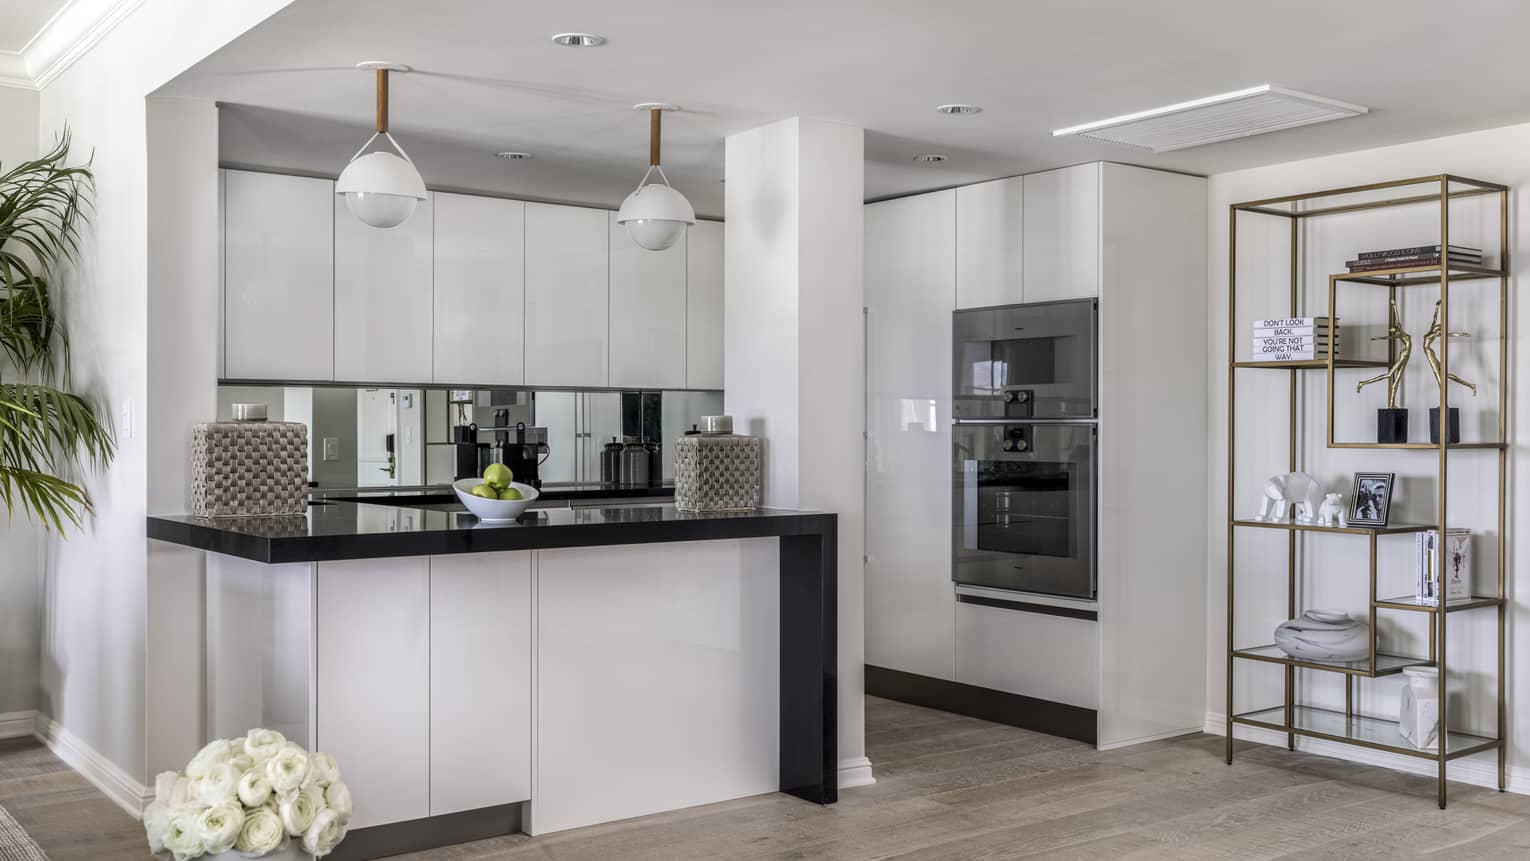 Kitchen with white cupboards, black counter, two hanging lights